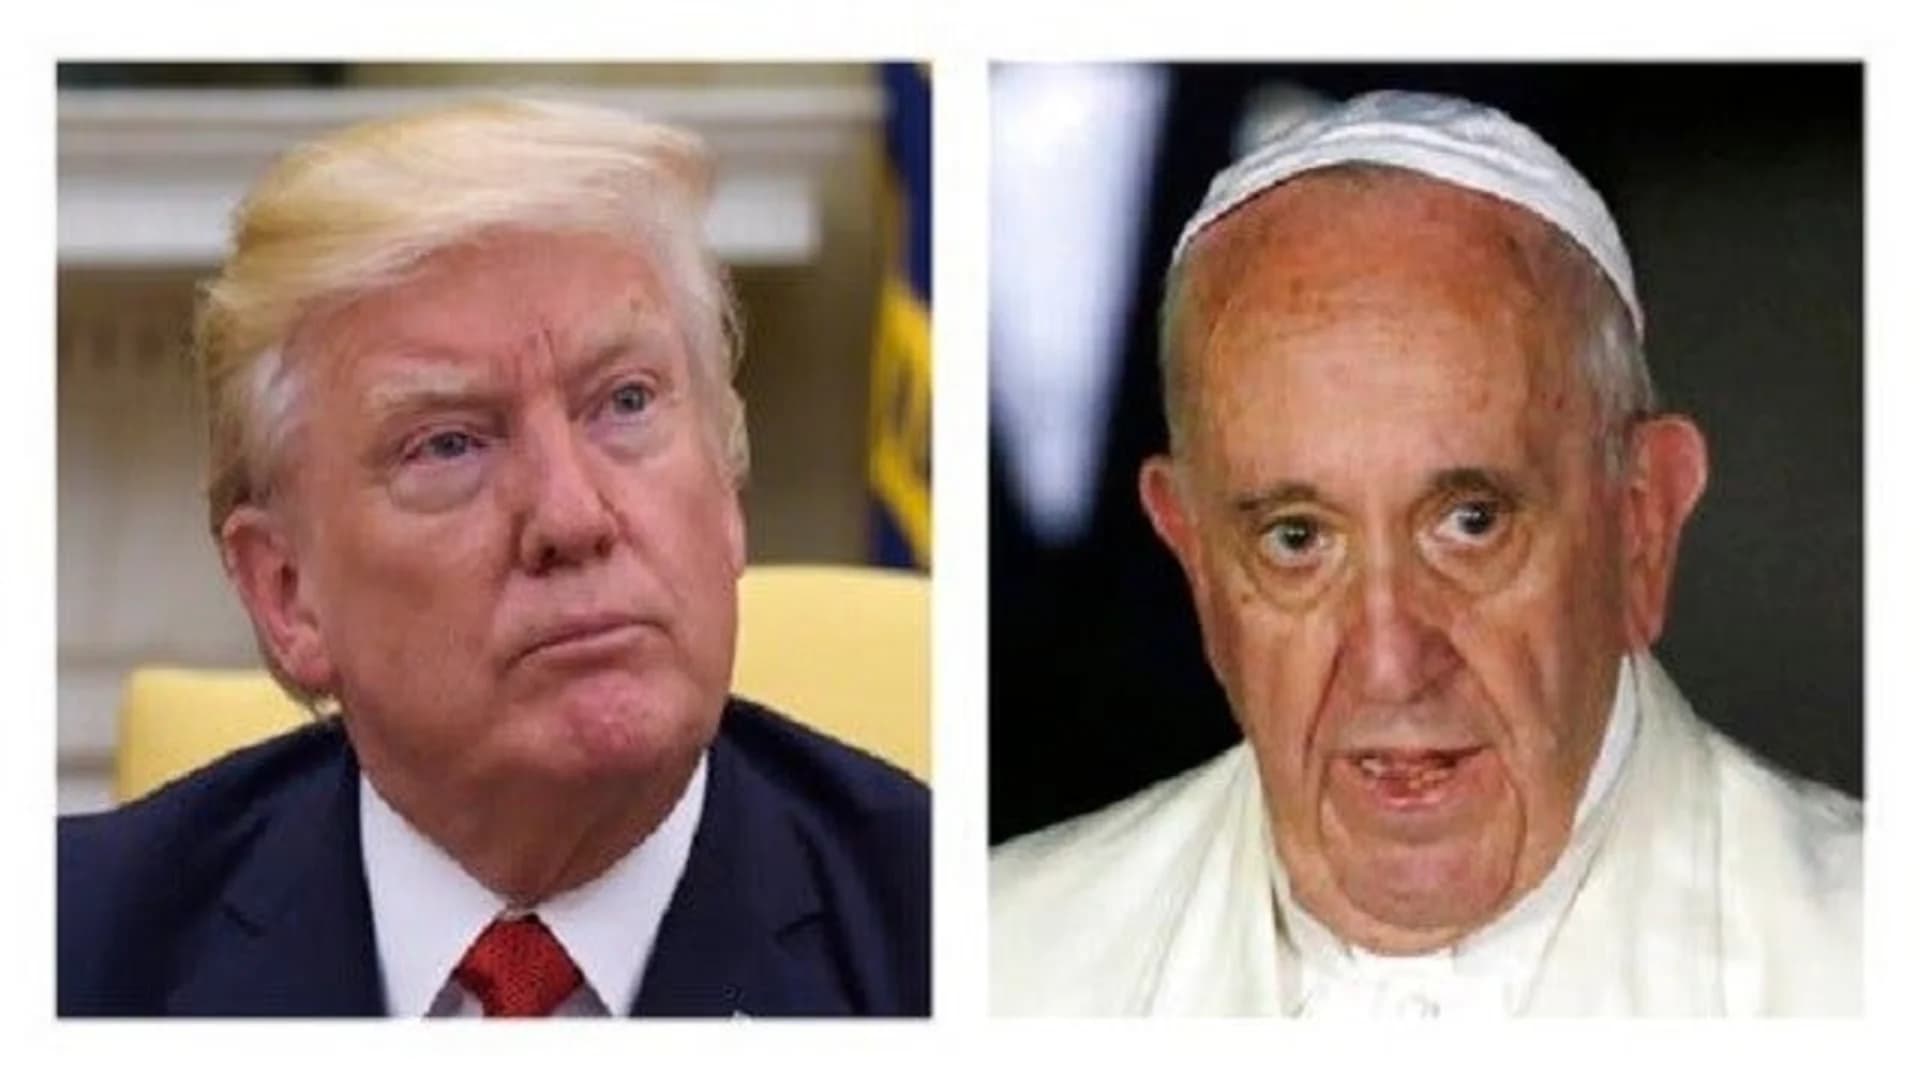 Setting aside past rude talk, Trump and pope focus on peace